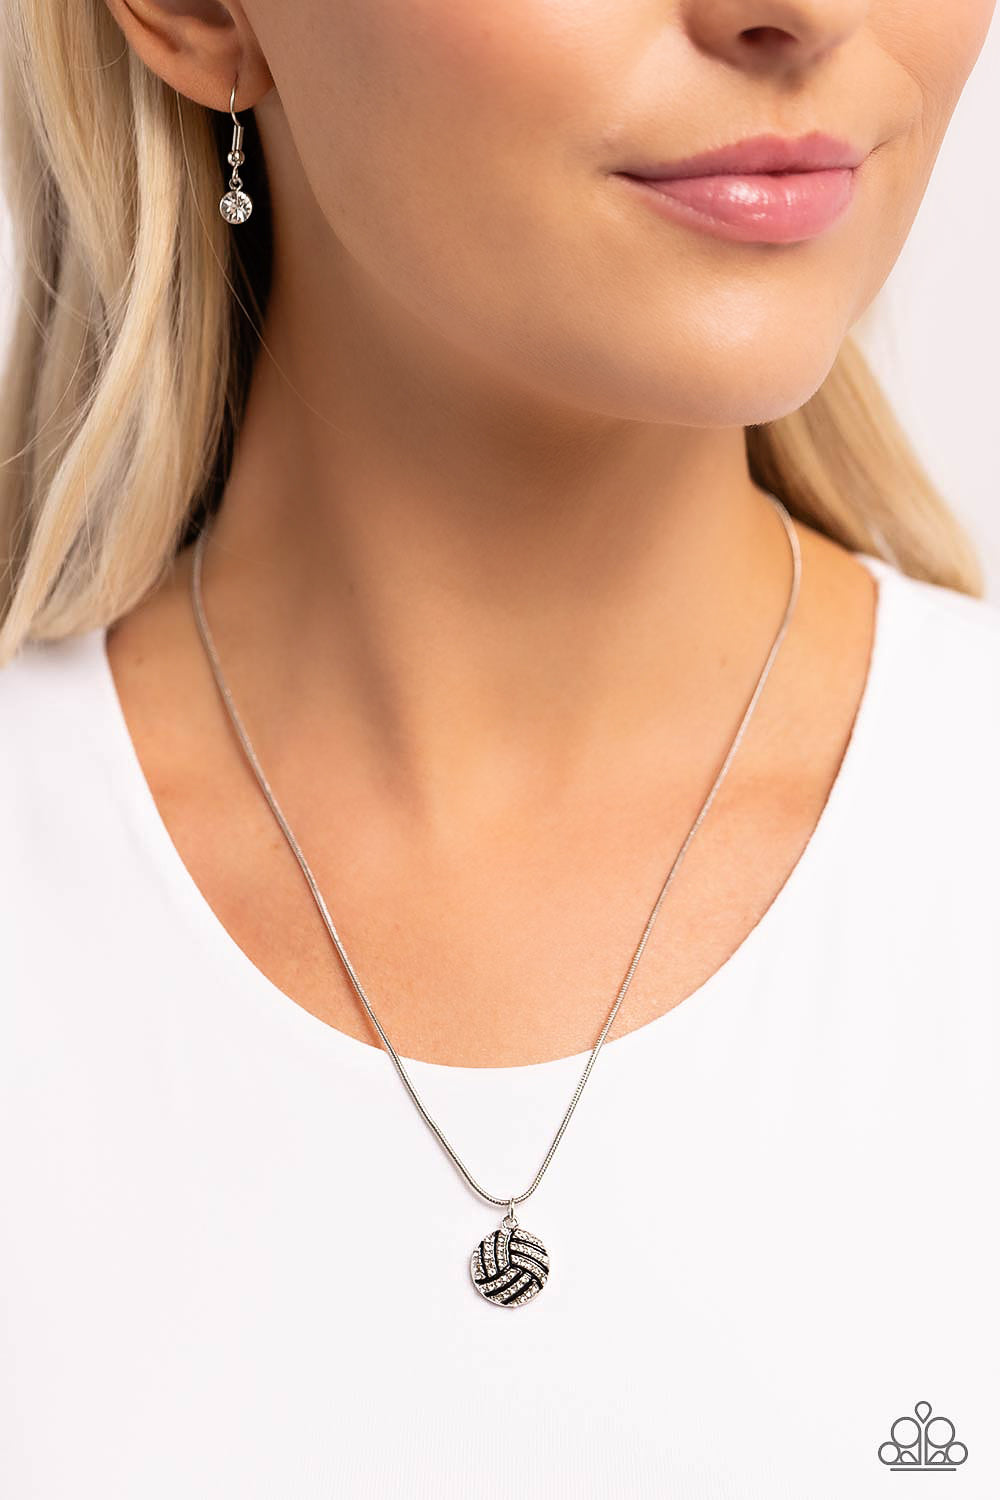 BUMP, SET, SHIMMER! WHITE-NECKLACE